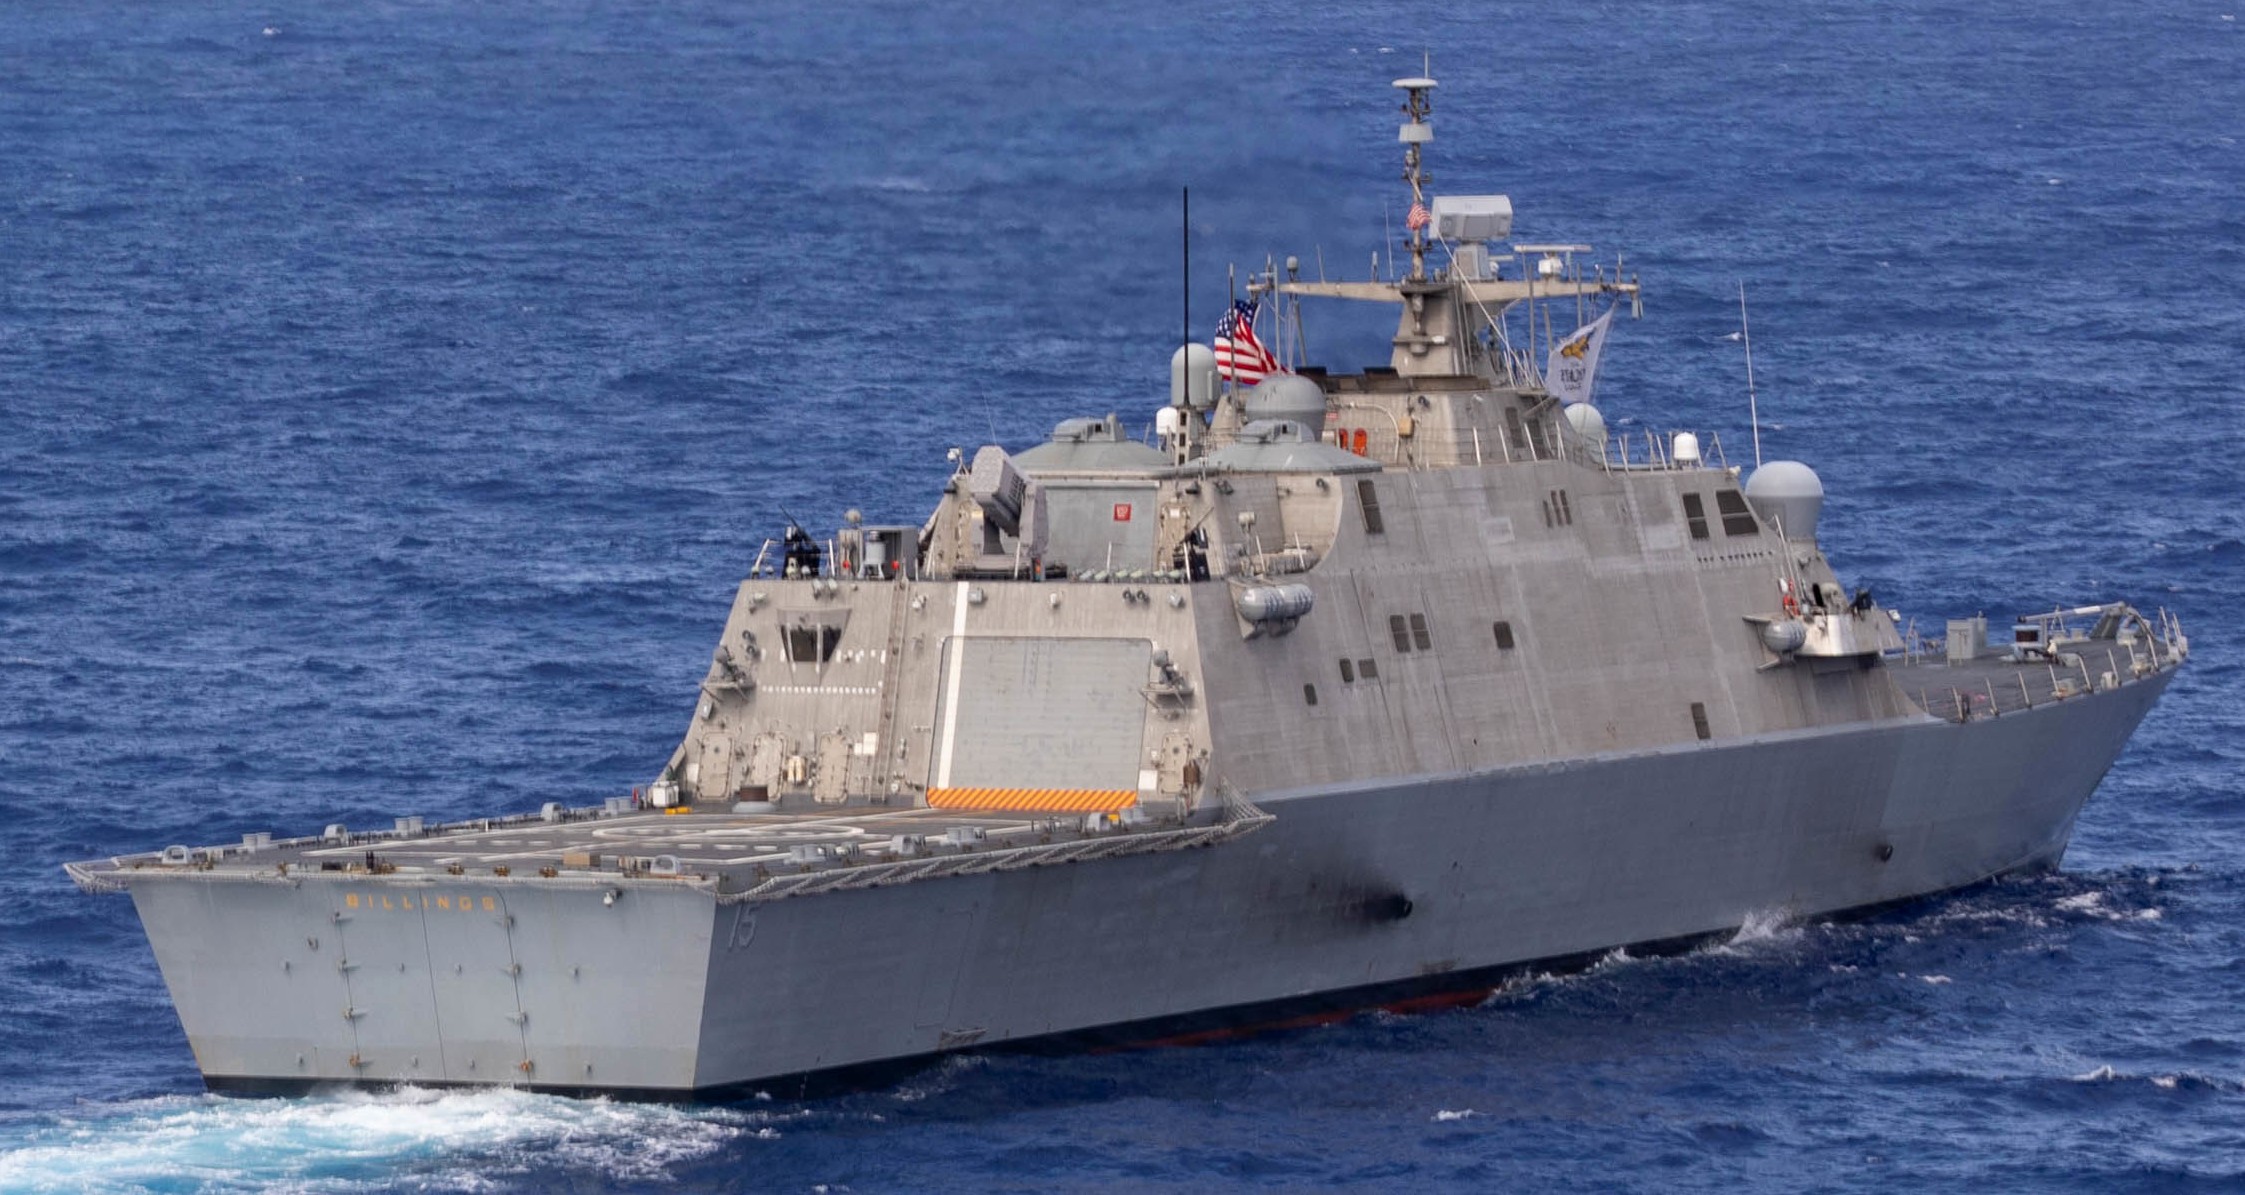 lcs-15 uss billings freedom class littoral combat ship us navy 59